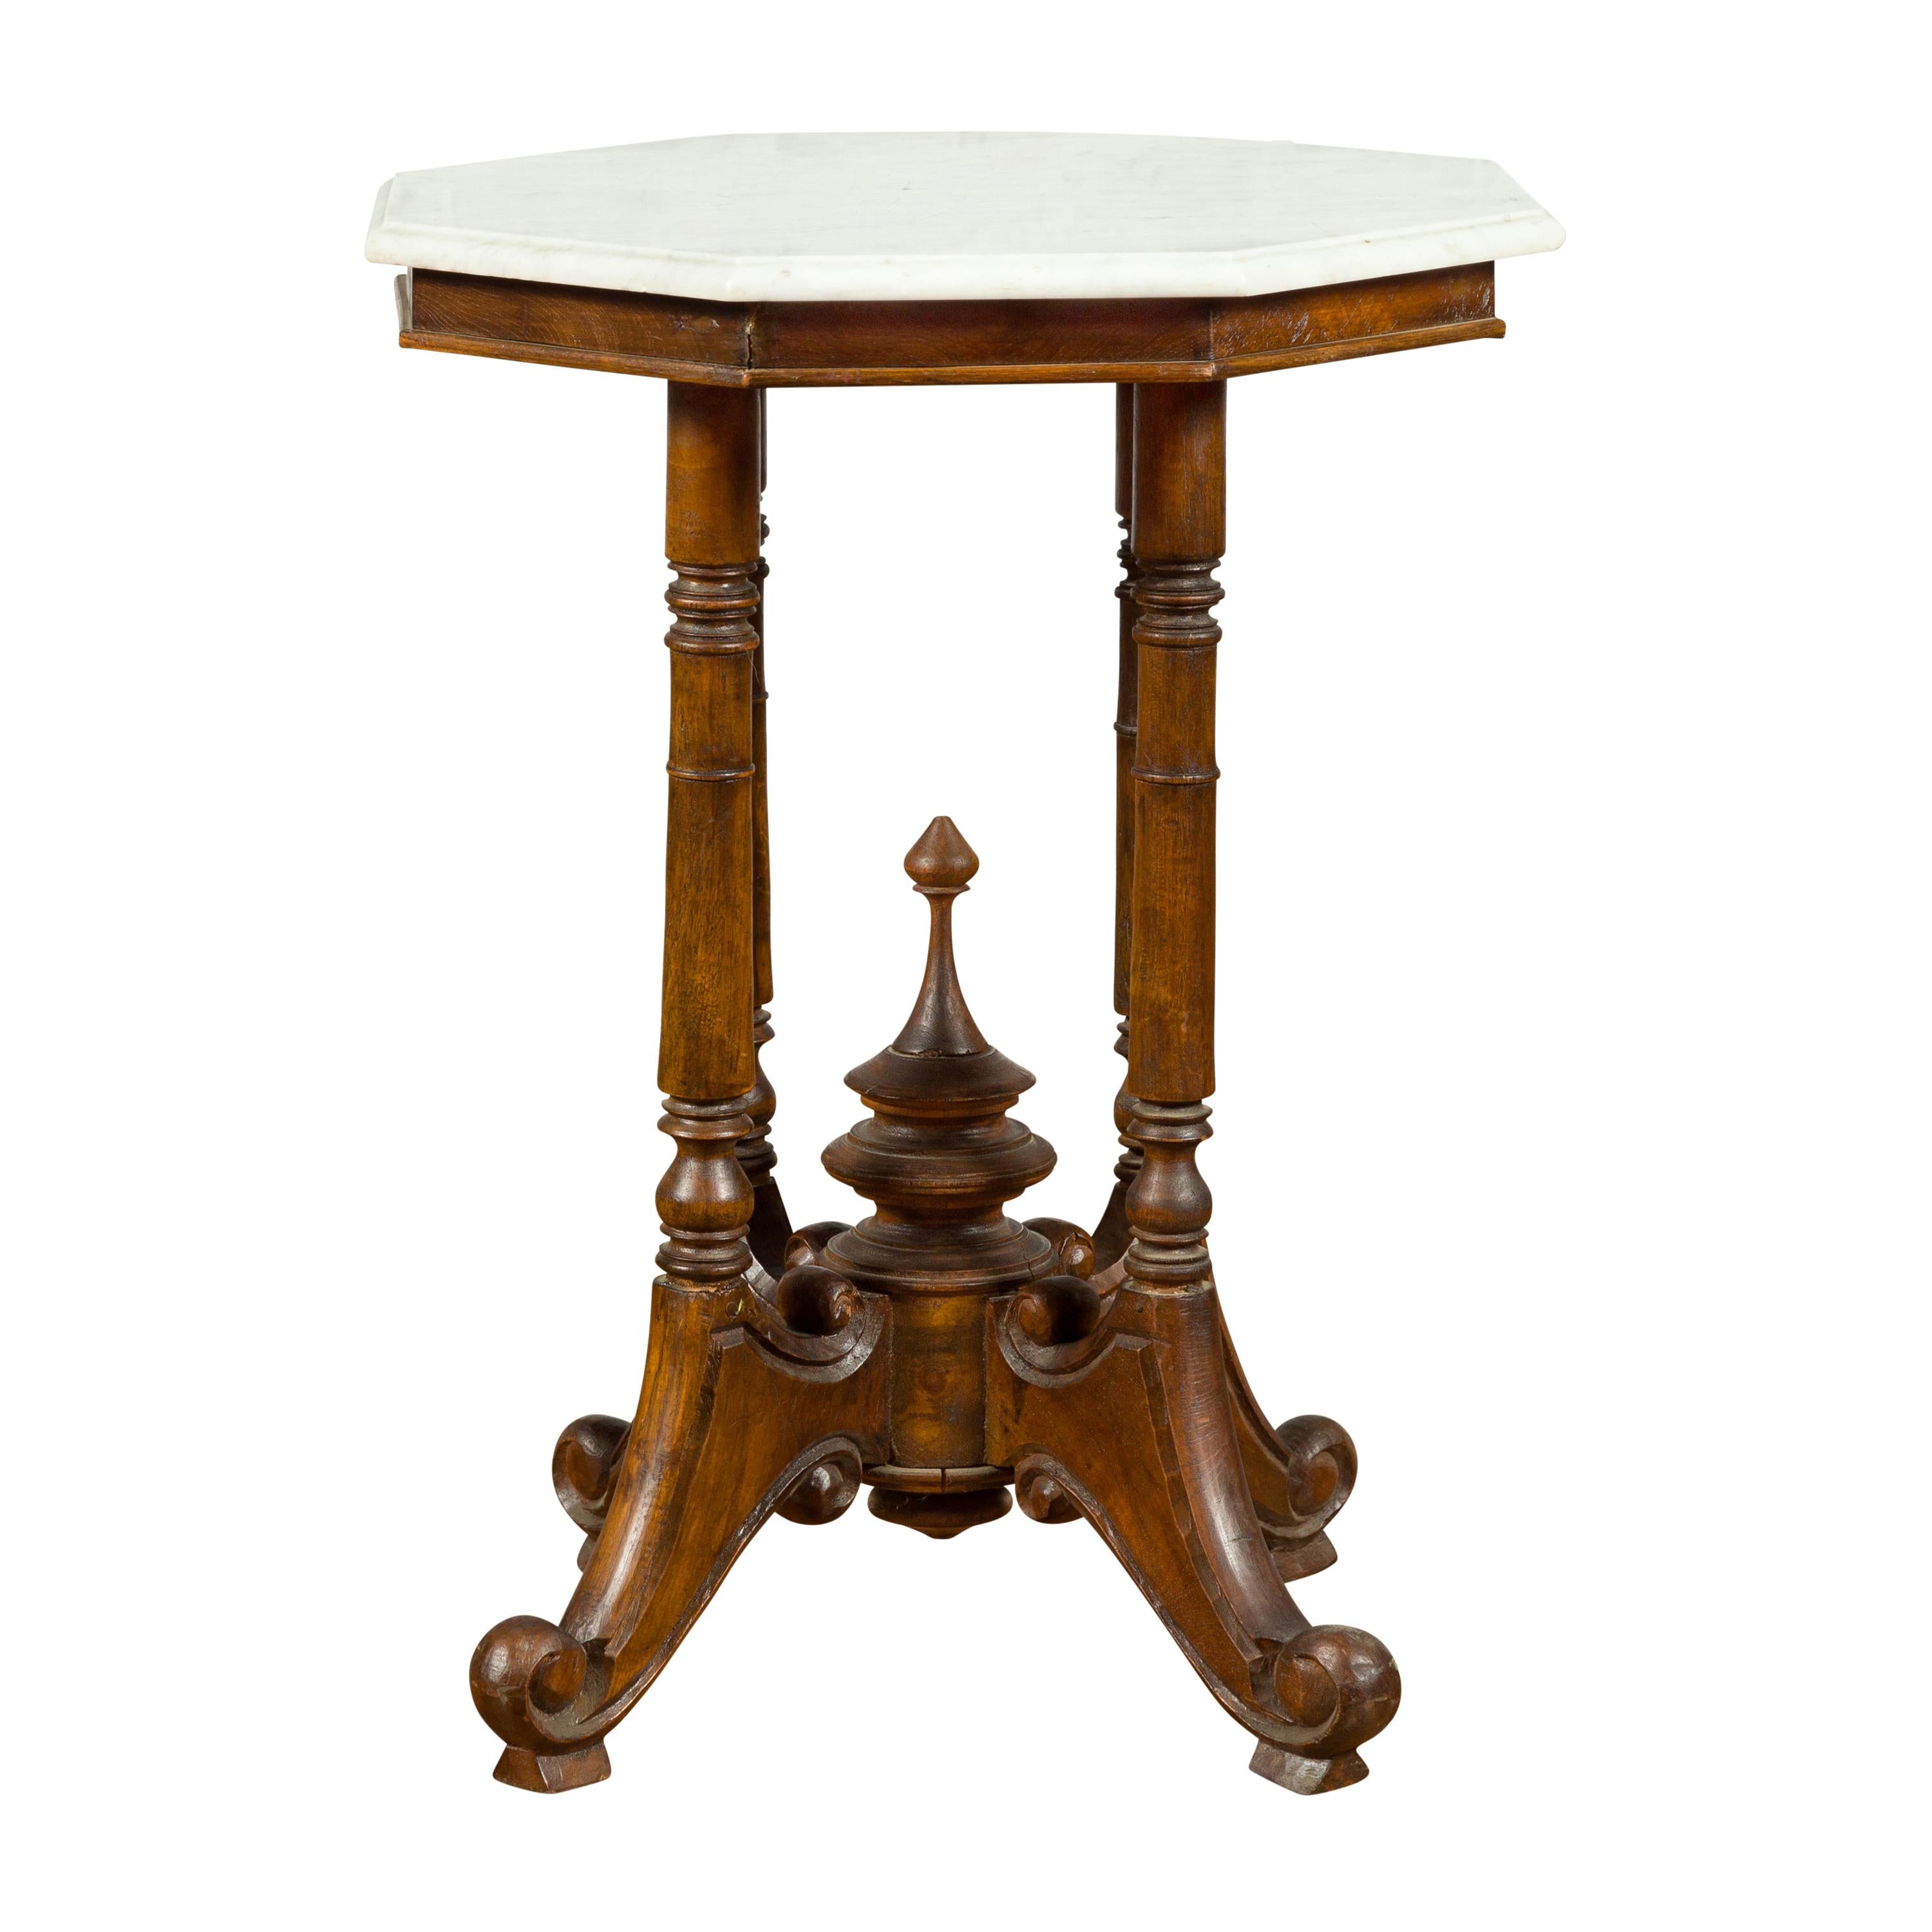 Chinese Wooden Guéridon Side Table with Octagonal White Marble Top and Finial